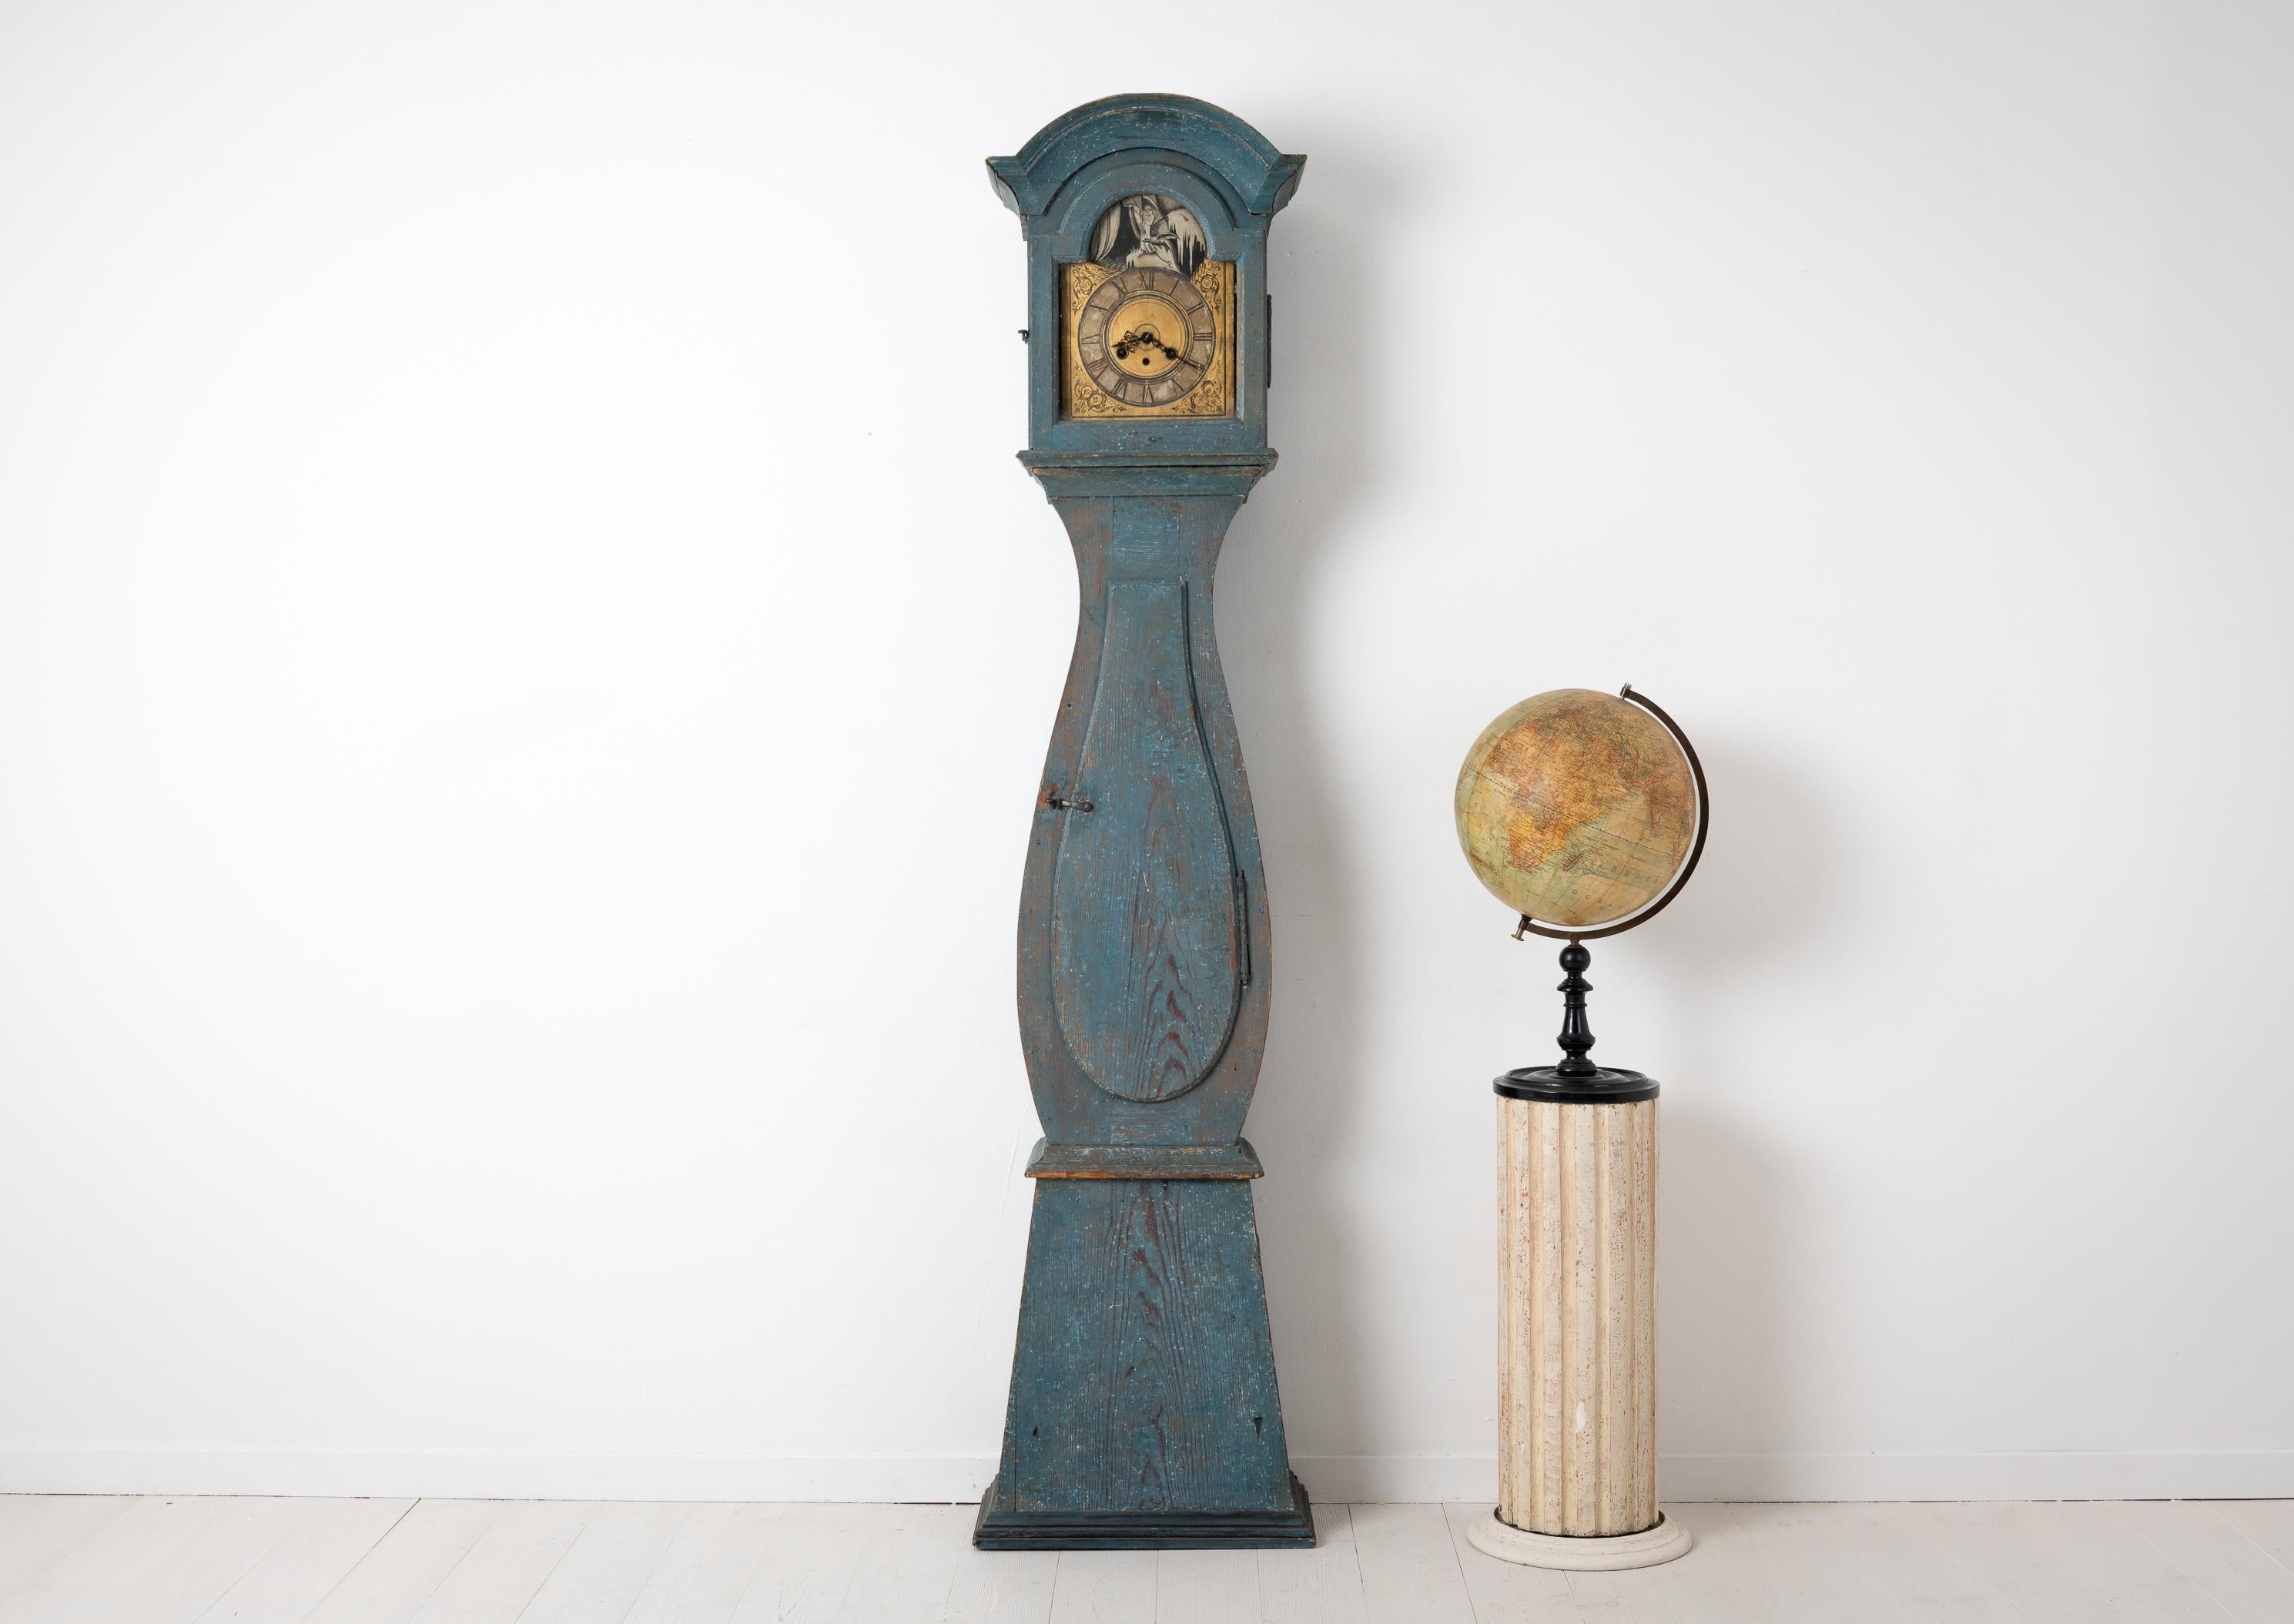 Blue baroque long case clock from the mid to late 18th century, between 1770 and 1790. The clock is Swedish and made from Swedish pine with the original blue paint as well as the authentic patina from the 18th century. The patina has naturally